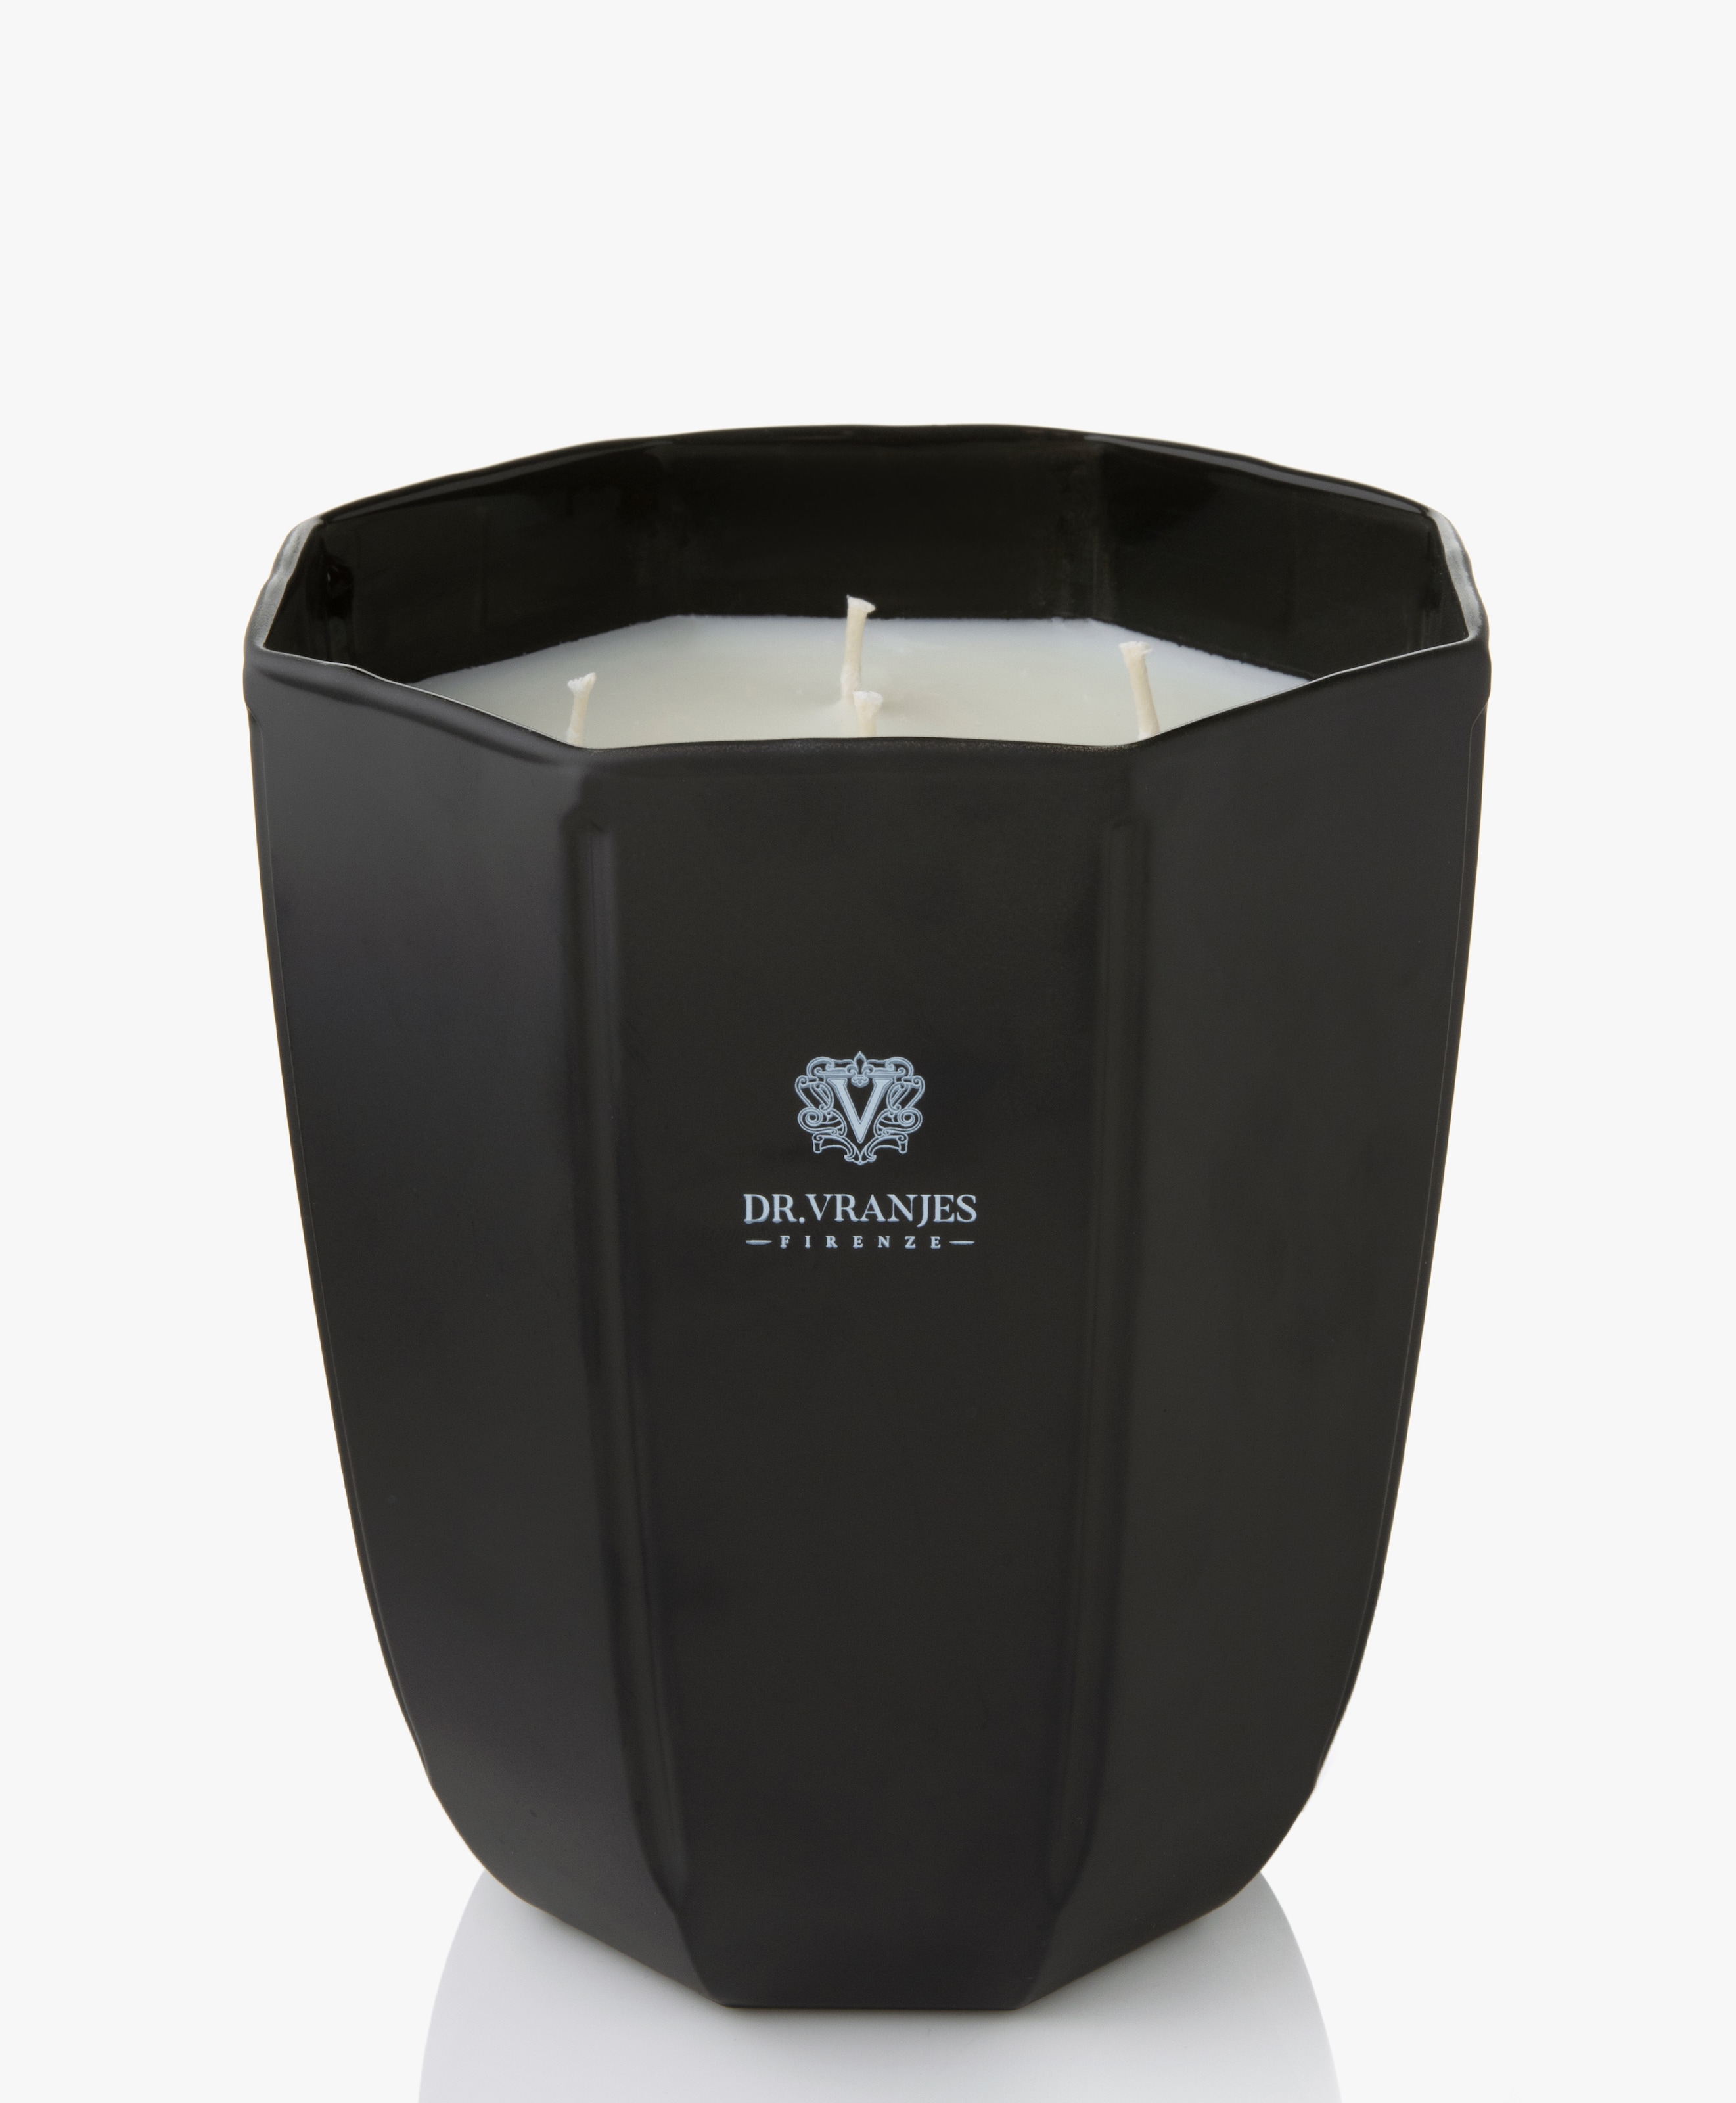 Ambra Scented Candle in Onyx Vase